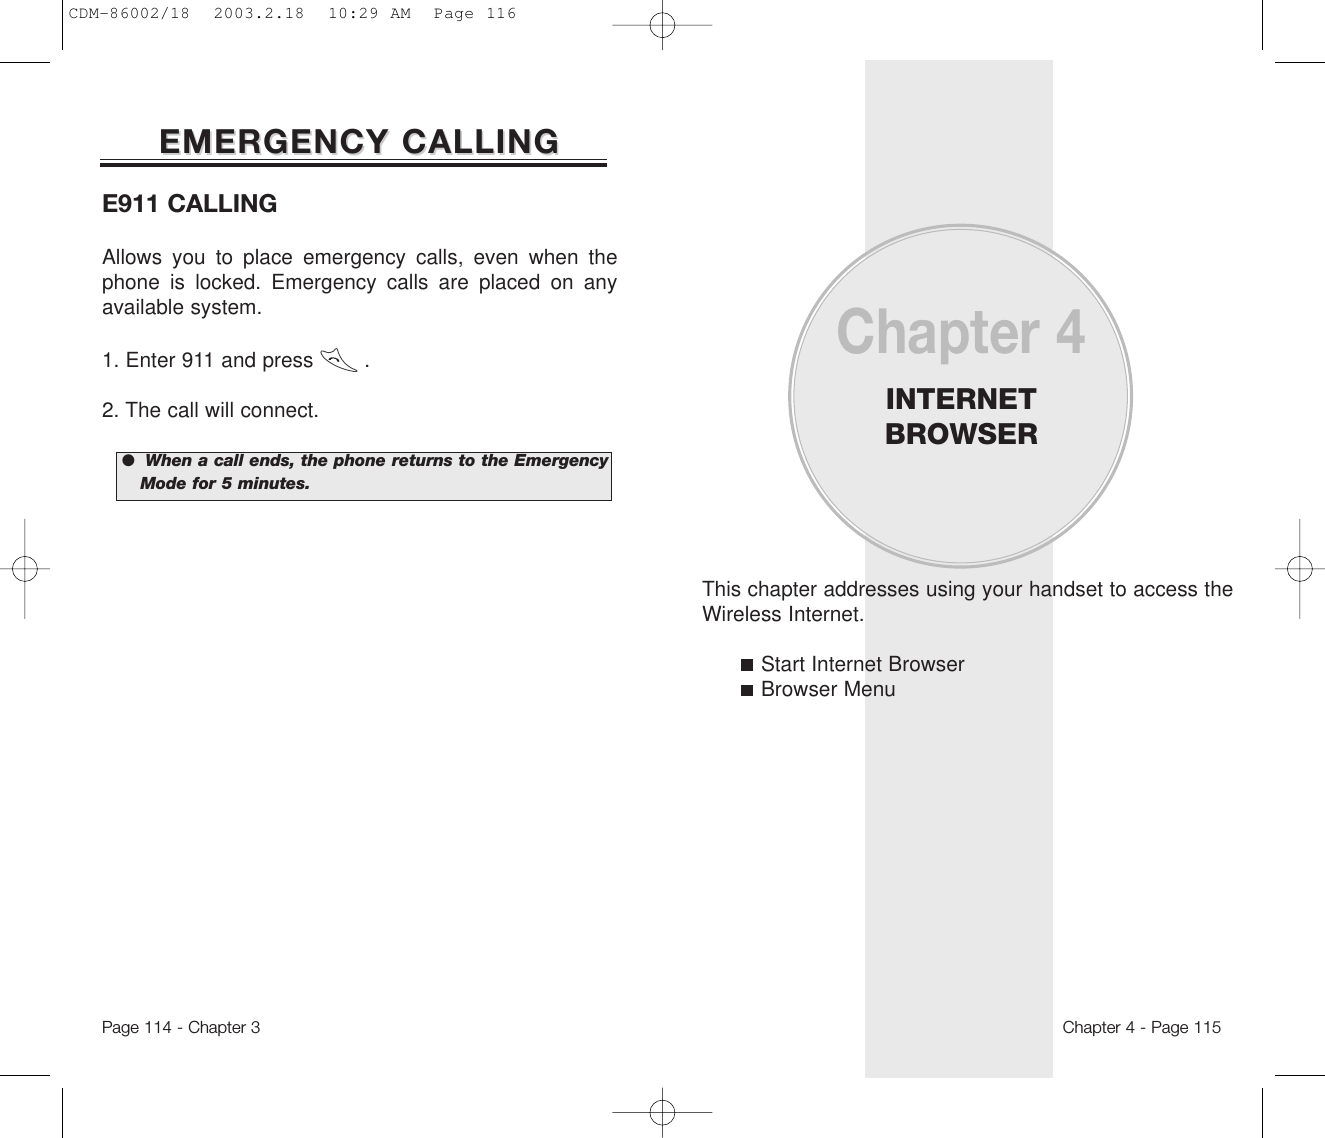 This chapter addresses using your handset to access theWireless Internet.Start Internet BrowserBrowser MenuChapter 4INTERNETBROWSERChapter 4 - Page 115E911 CALLINGAllows you to place emergency calls, even when thephone is locked. Emergency calls are placed on anyavailable system.1. Enter 911 and press        . 2. The call will connect.EMERGENCY CALLINGEMERGENCY CALLINGPage 114 - Chapter 3●  When a call ends, the phone returns to the EmergencyMode for 5 minutes.CDM-86002/18  2003.2.18  10:29 AM  Page 116